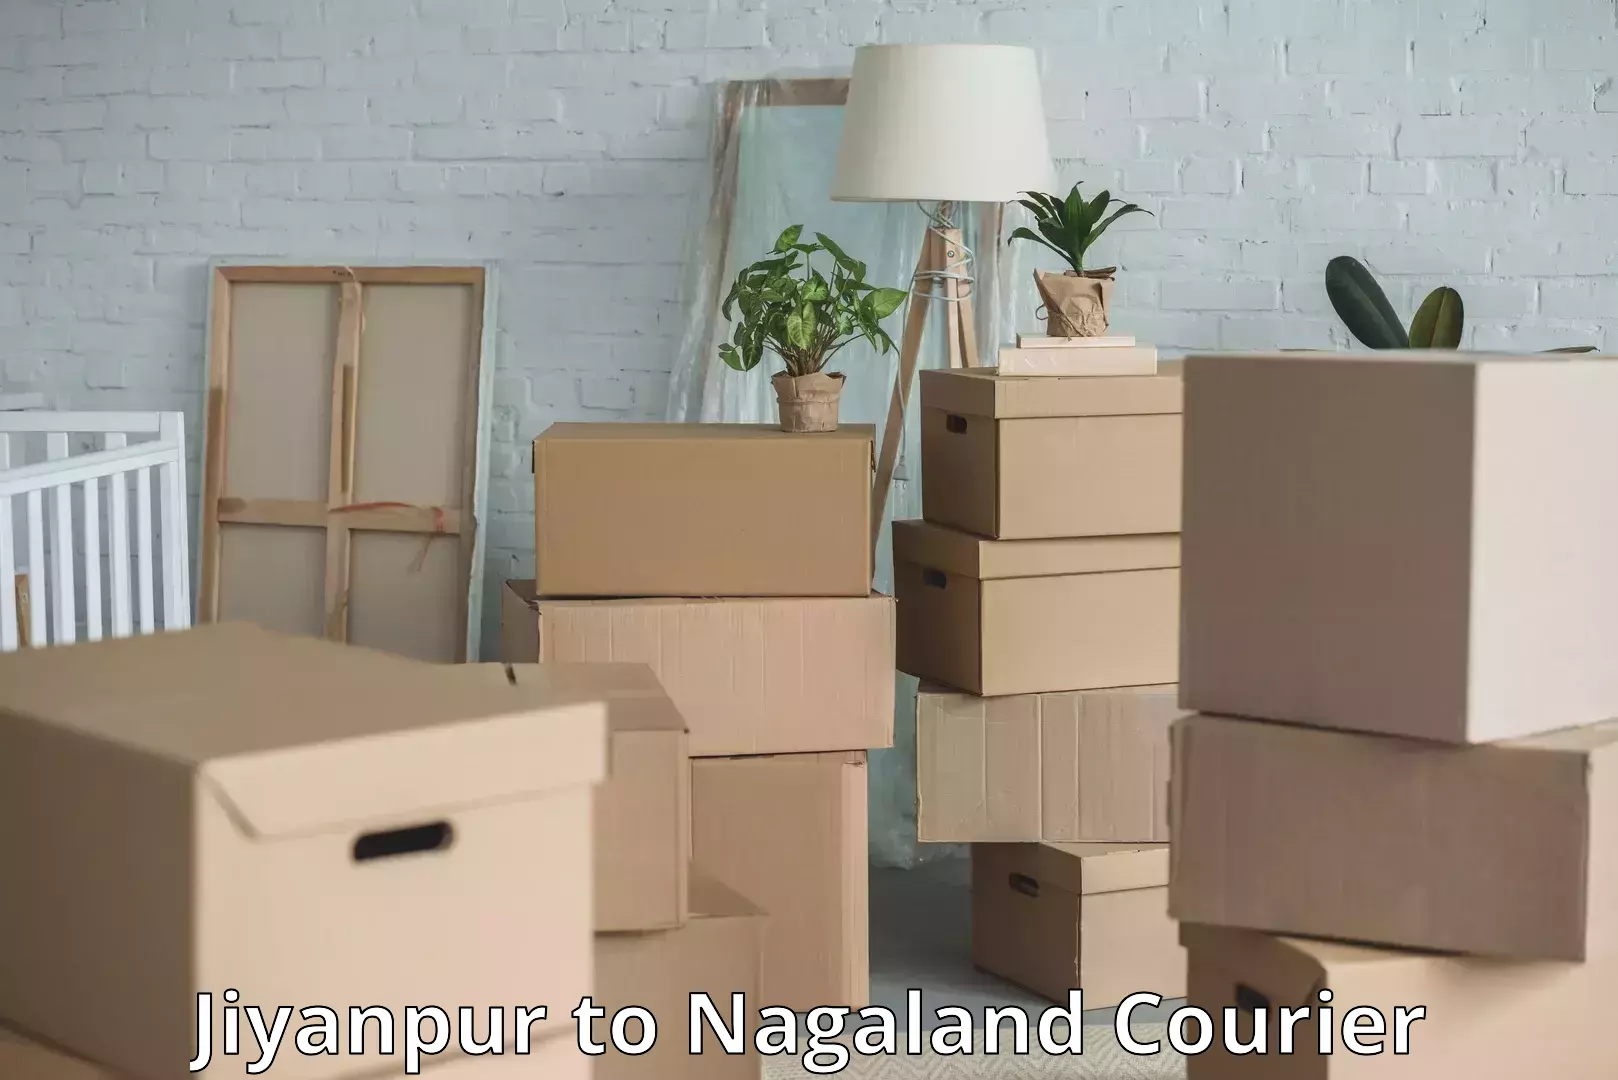 Luggage shipping specialists Jiyanpur to Nagaland